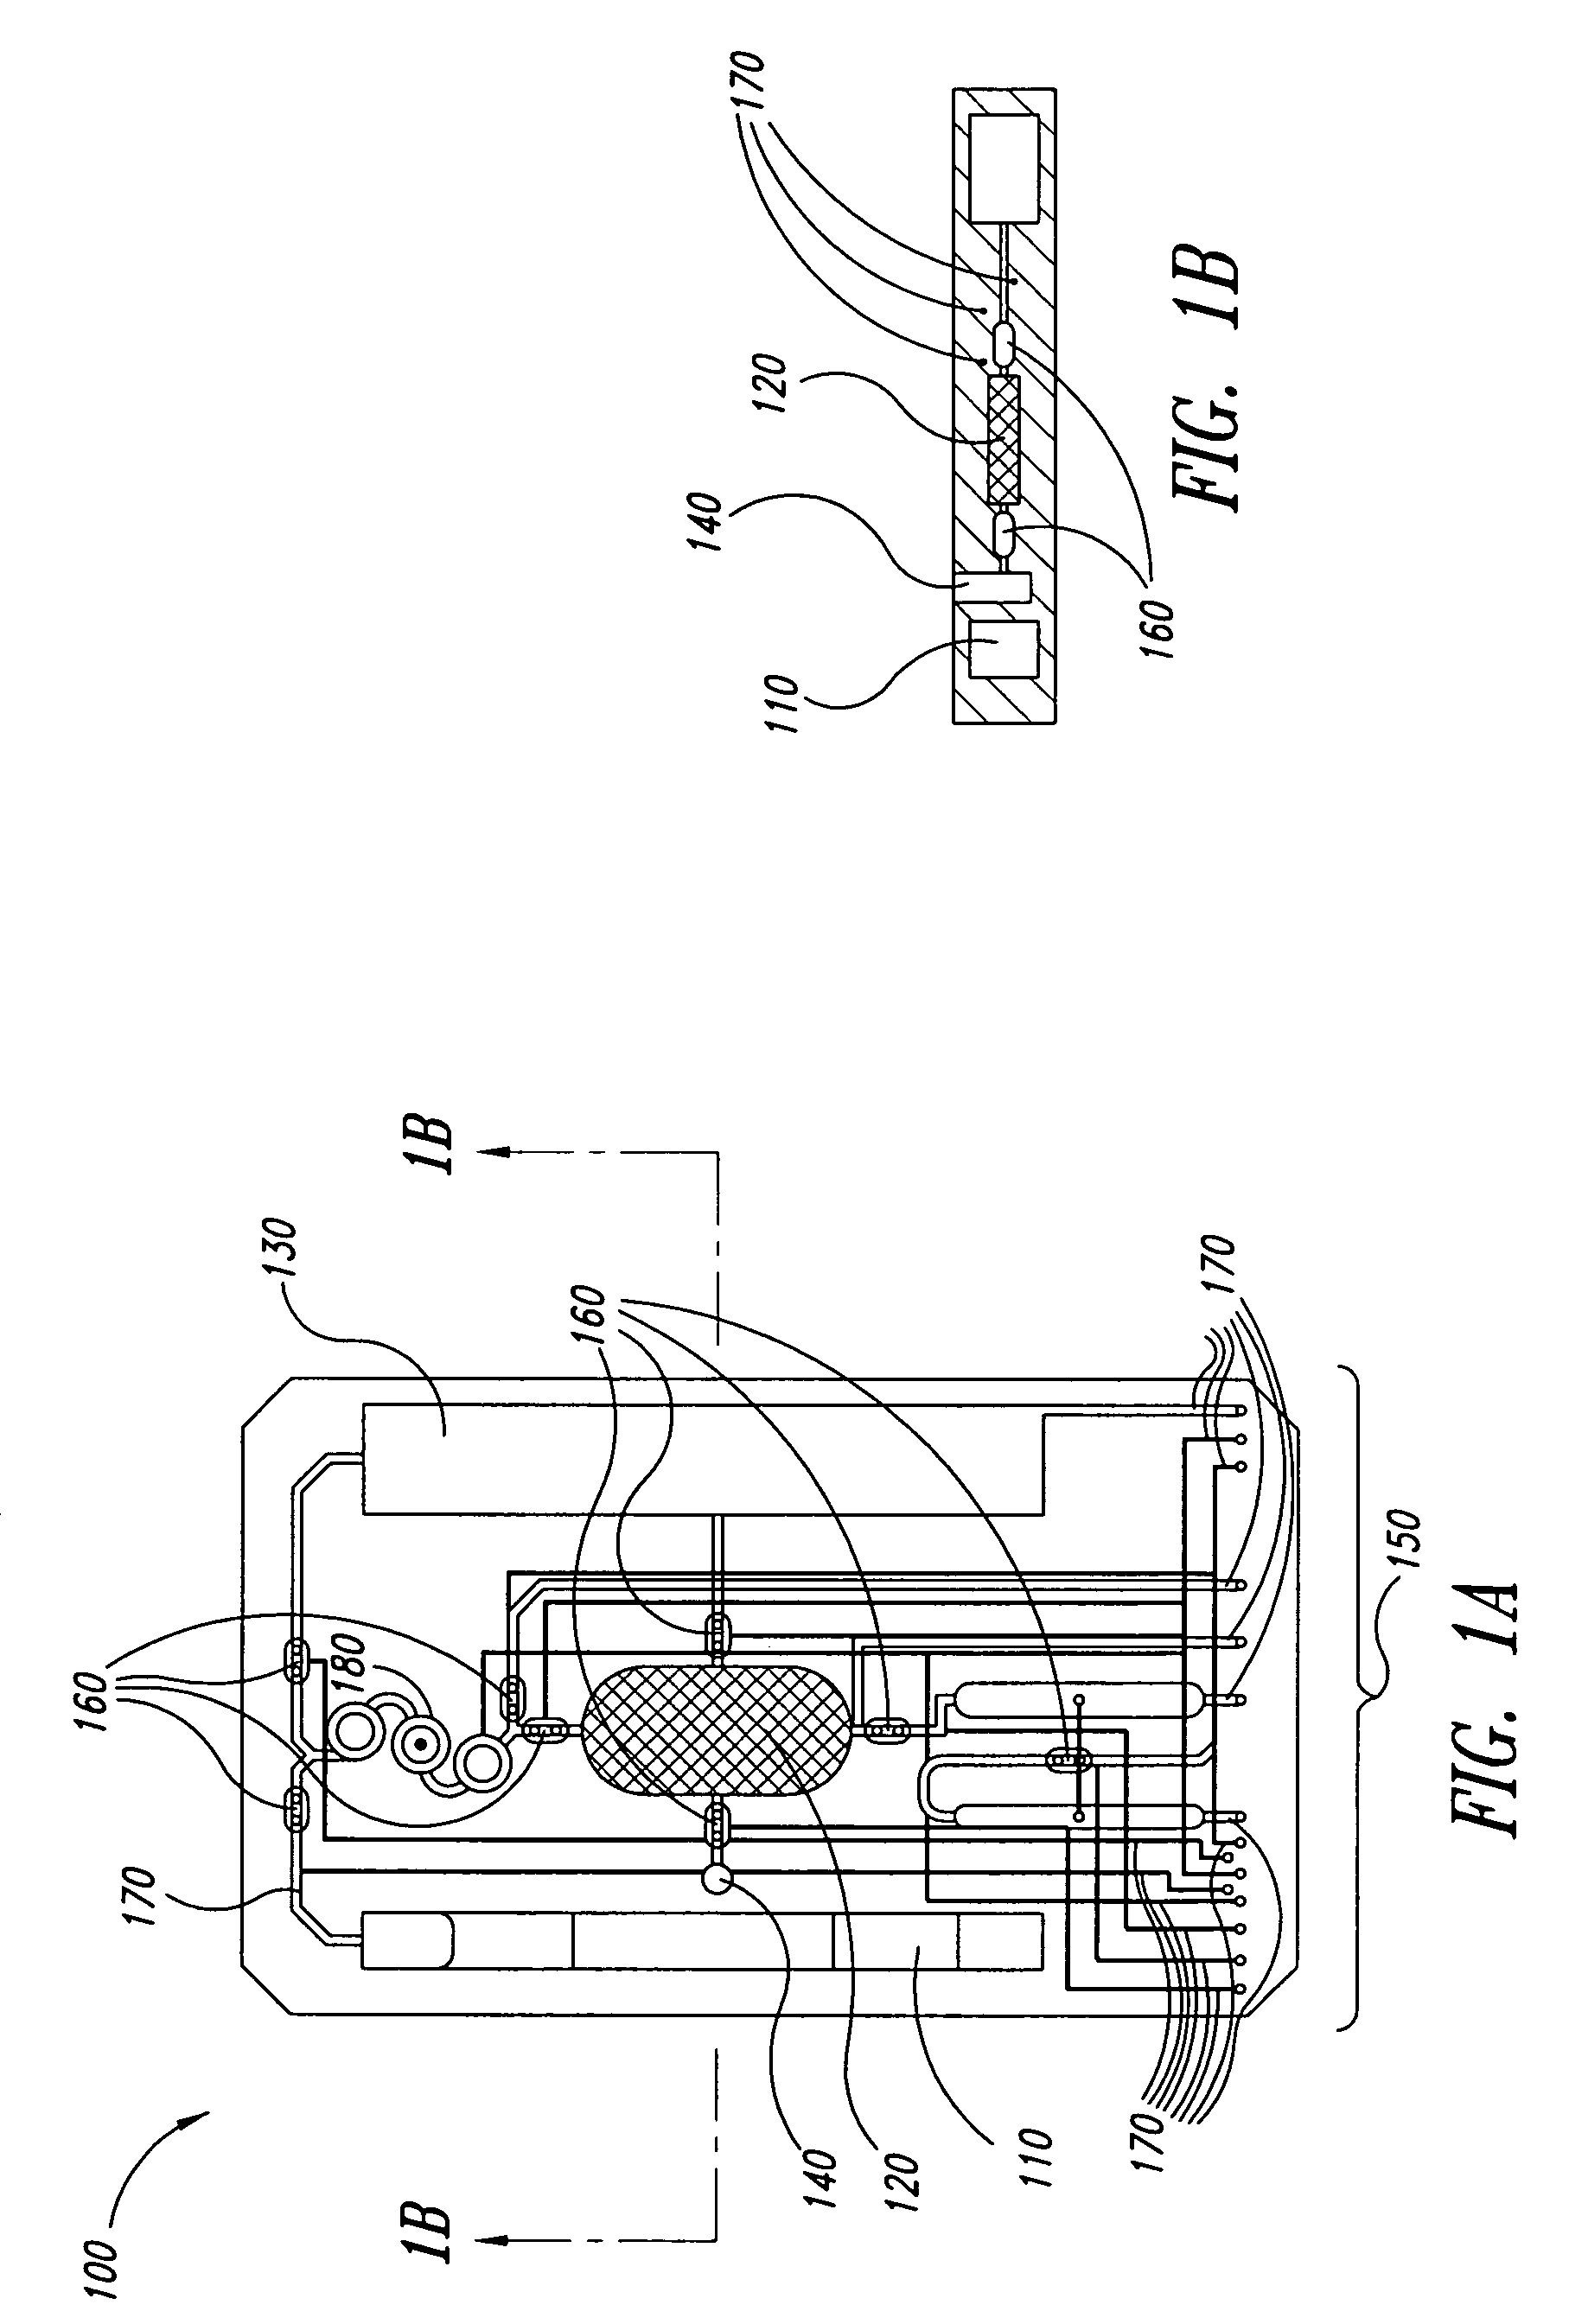 Method and system for microfluidic manipulation, amplification and analysis of fluids, for example, bacteria assays and antiglobulin testing